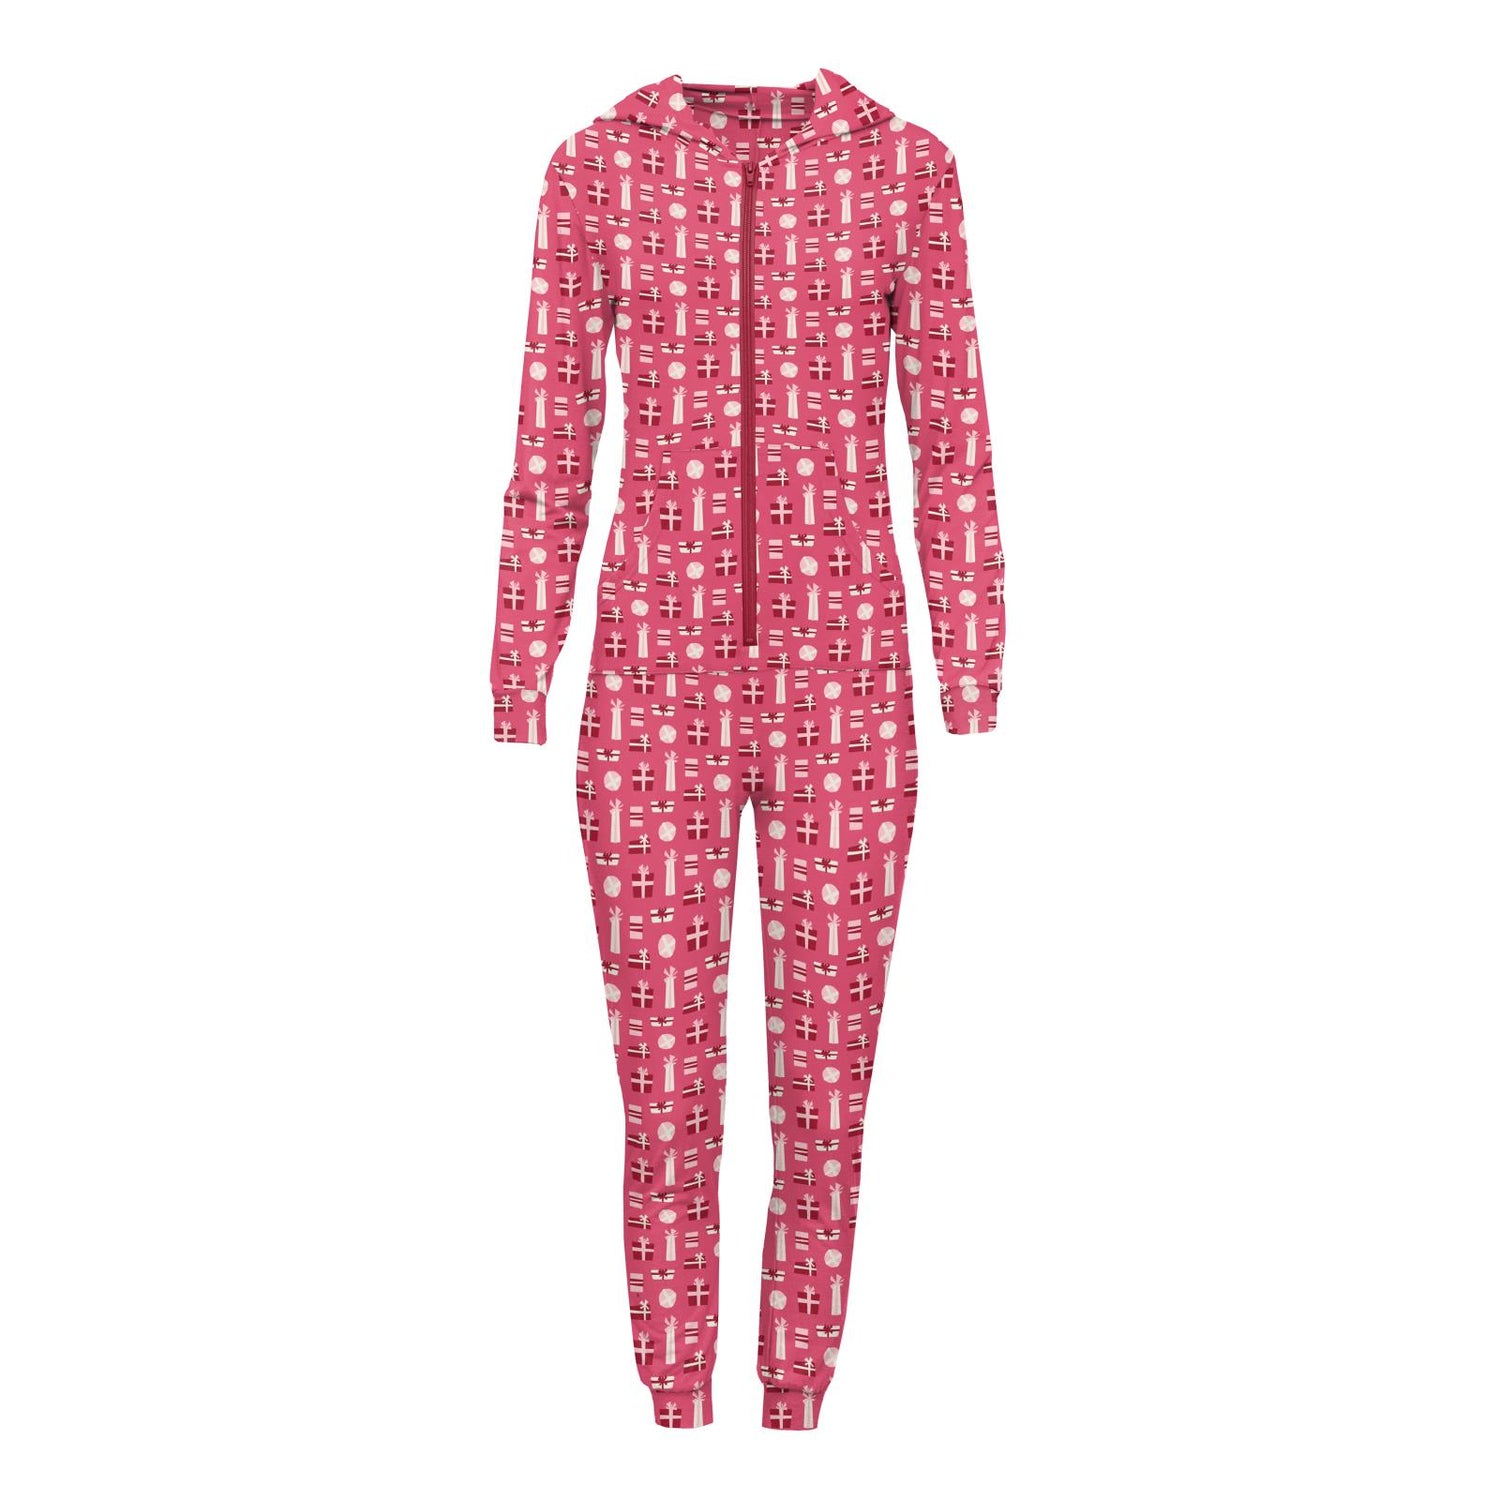 Women's Print Long Sleeve Jumpsuit with Hood in Winter Rose Presents